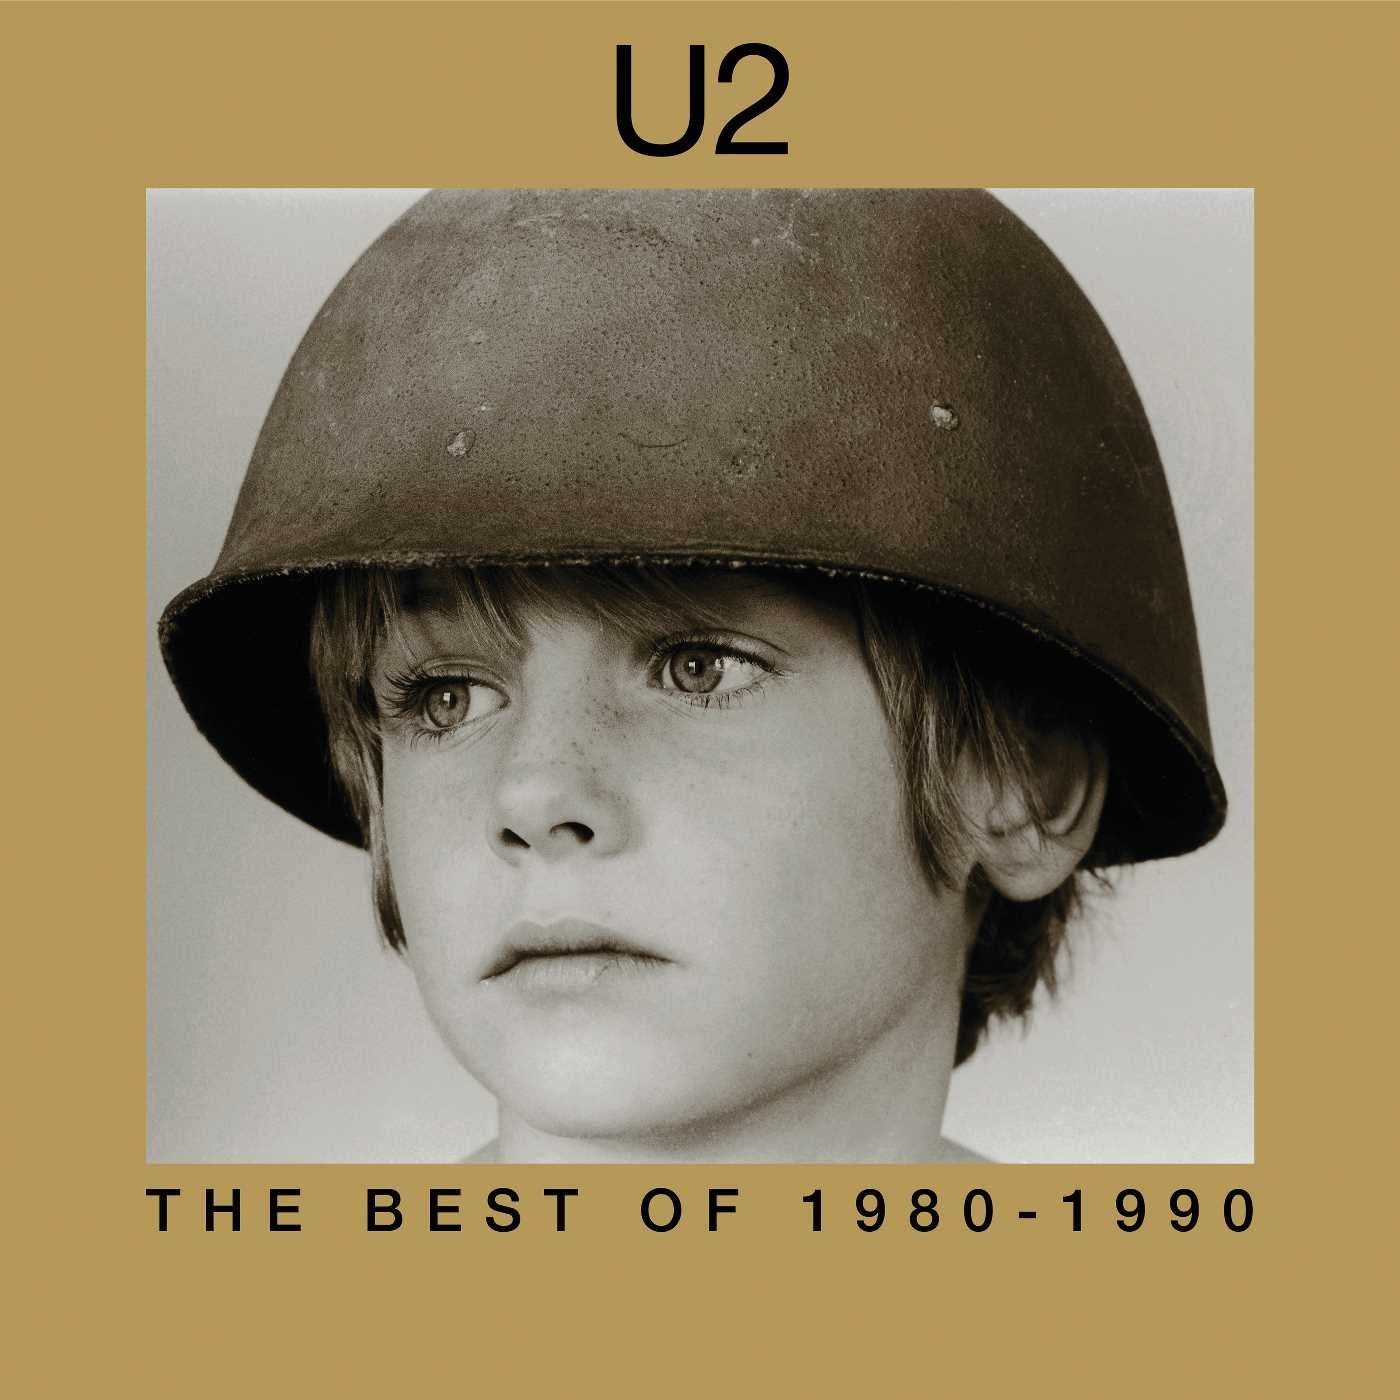 The Best Of 1980 To 1990 - U2